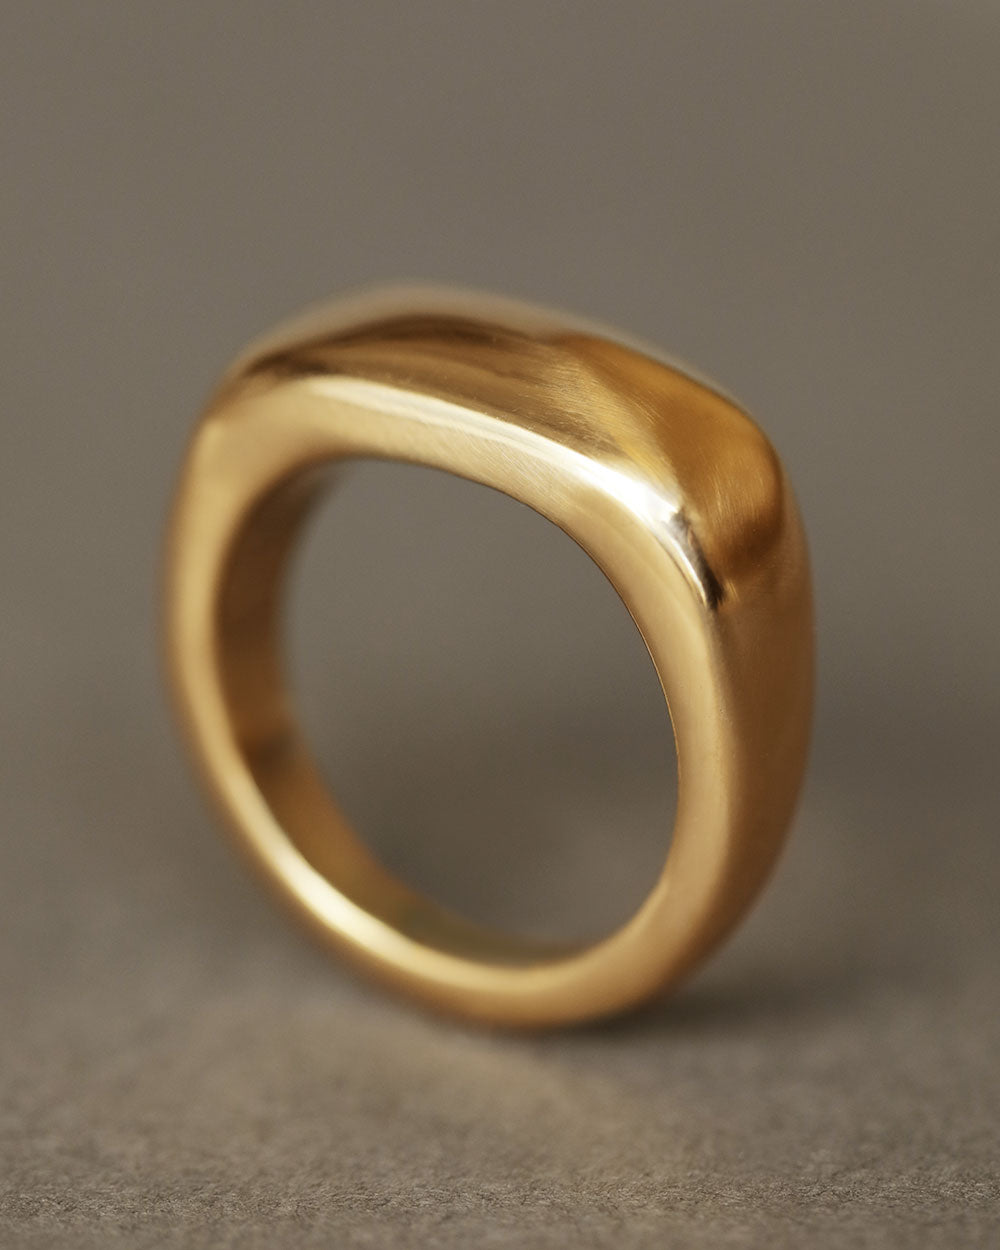 Solid 18k yellow gold heavy ring upright on gray paper. Noble Ring by George Rings for men, women, and all genders.